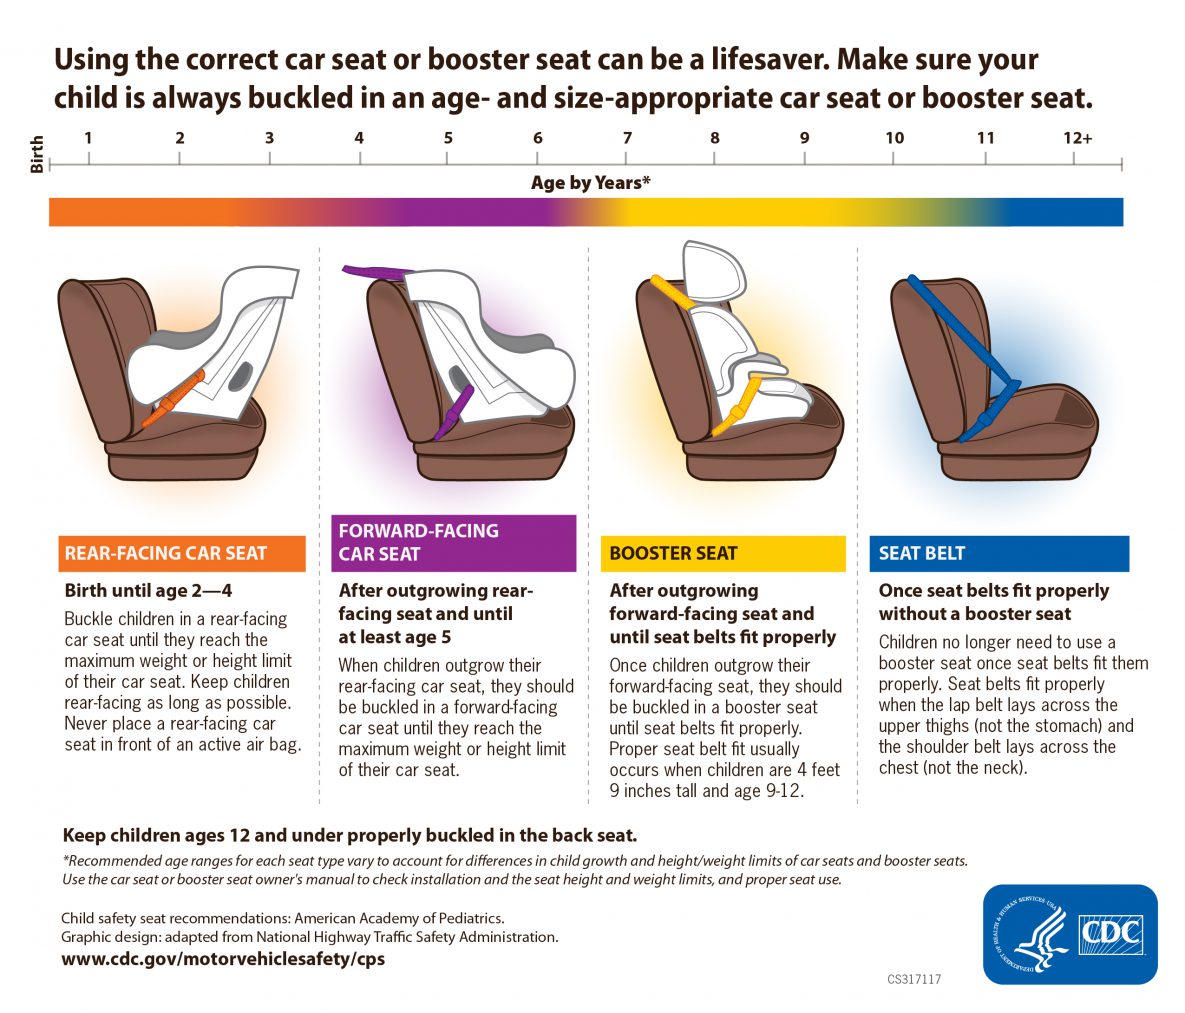 Authorities say children wearing coats underneath car seat can be